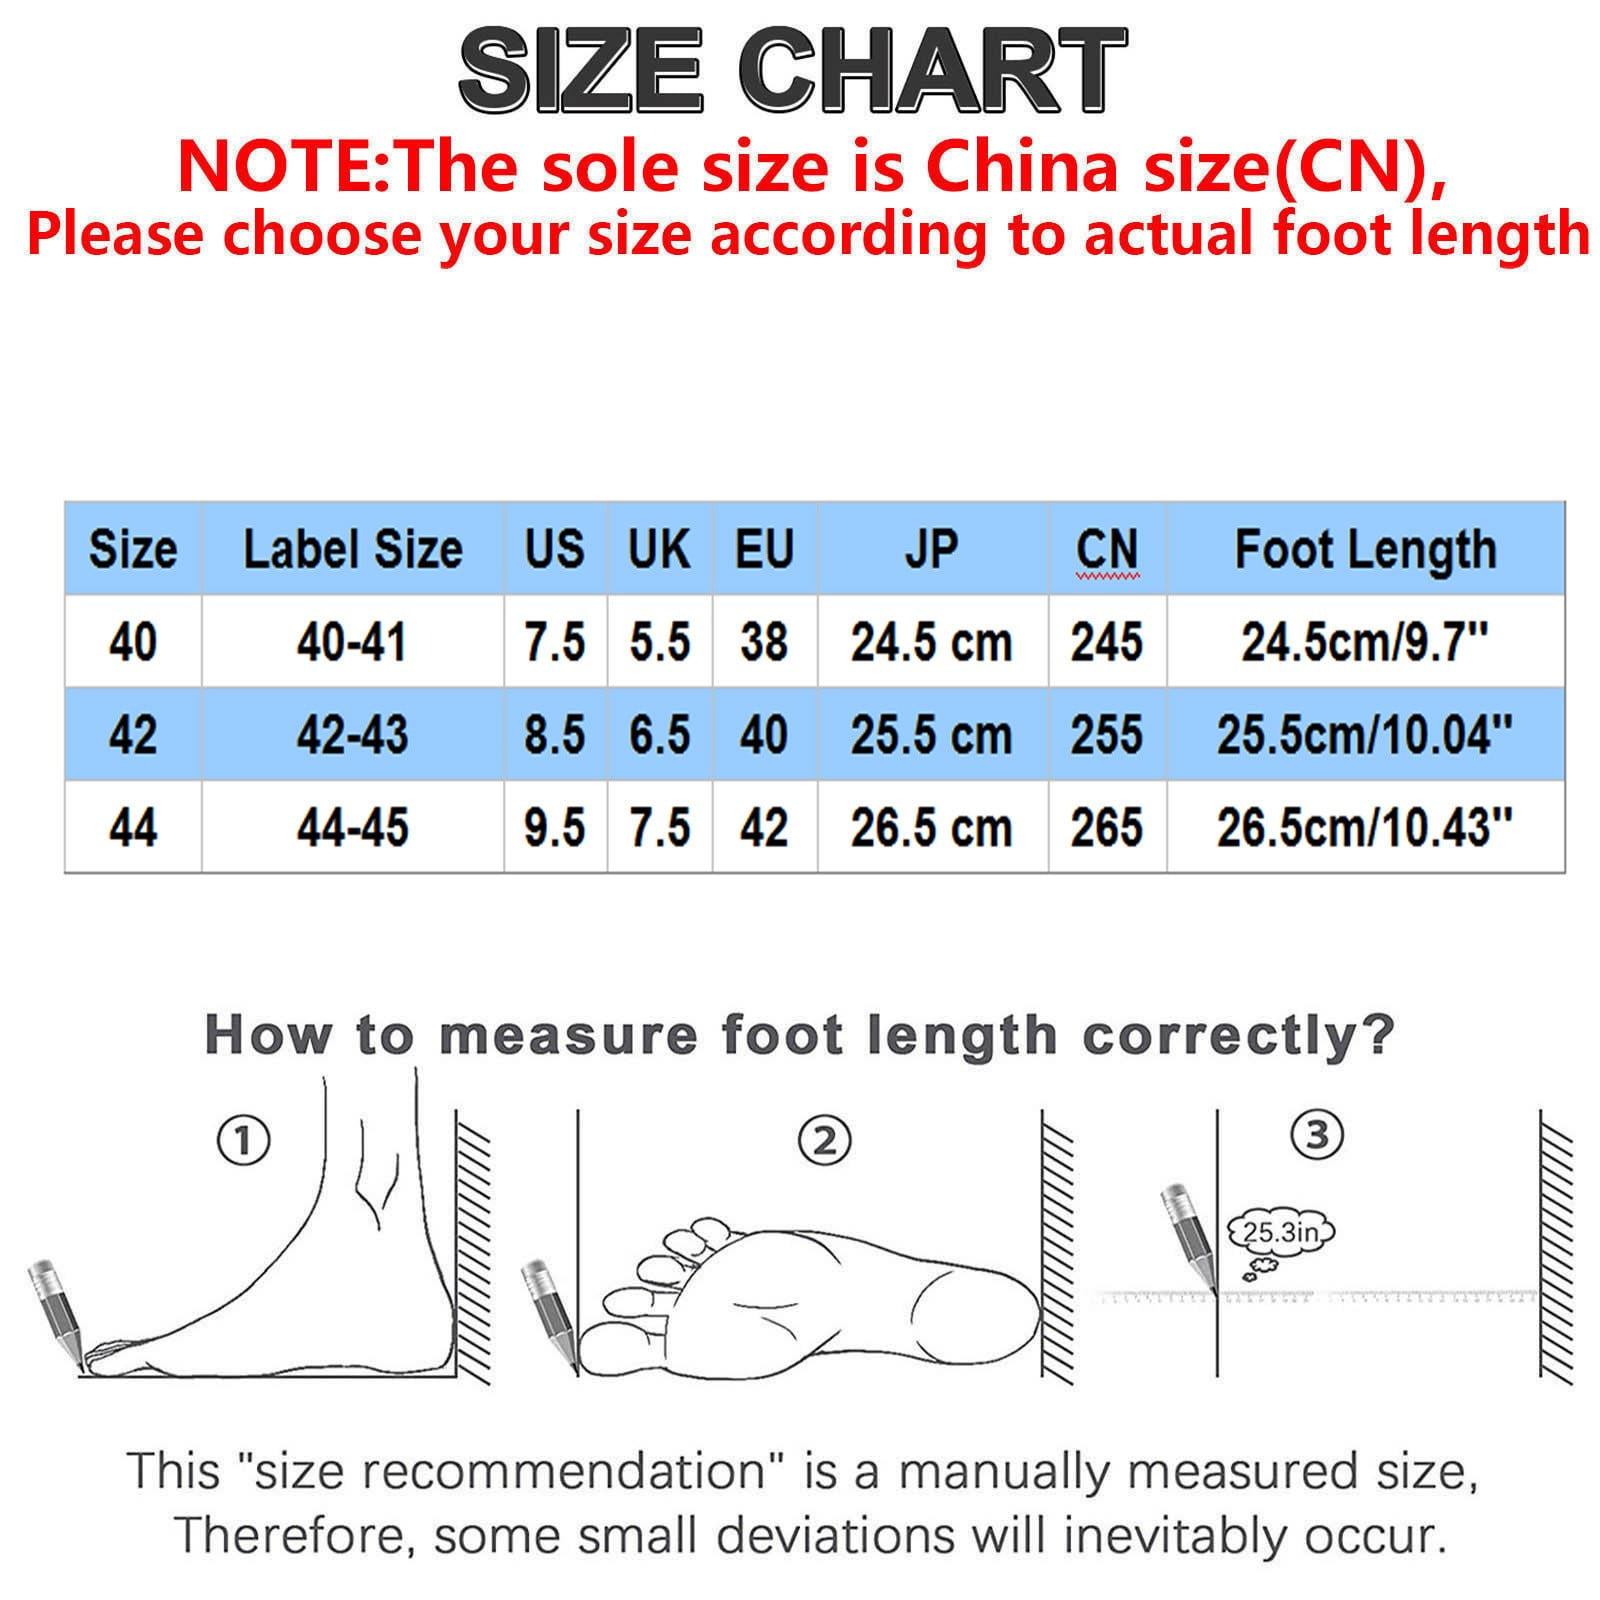 Philippines Shoe Size Charts: Conversion and Measurements